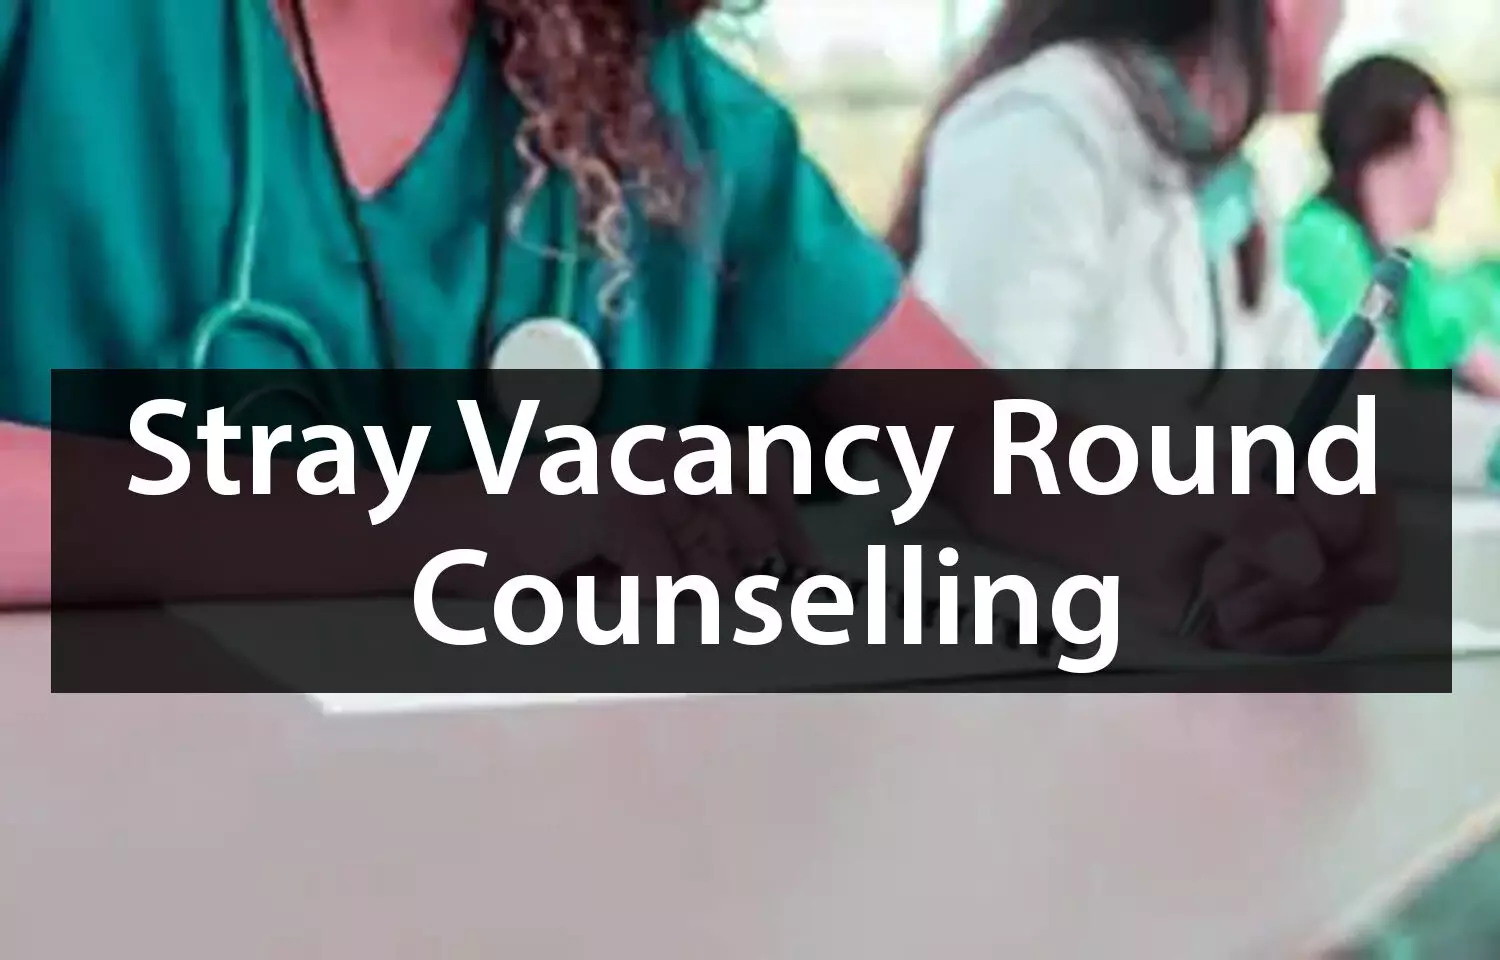 MCC Stray Vacancy Round NEET Counselling: 2,463 MBBS, BDS seats up for grabs